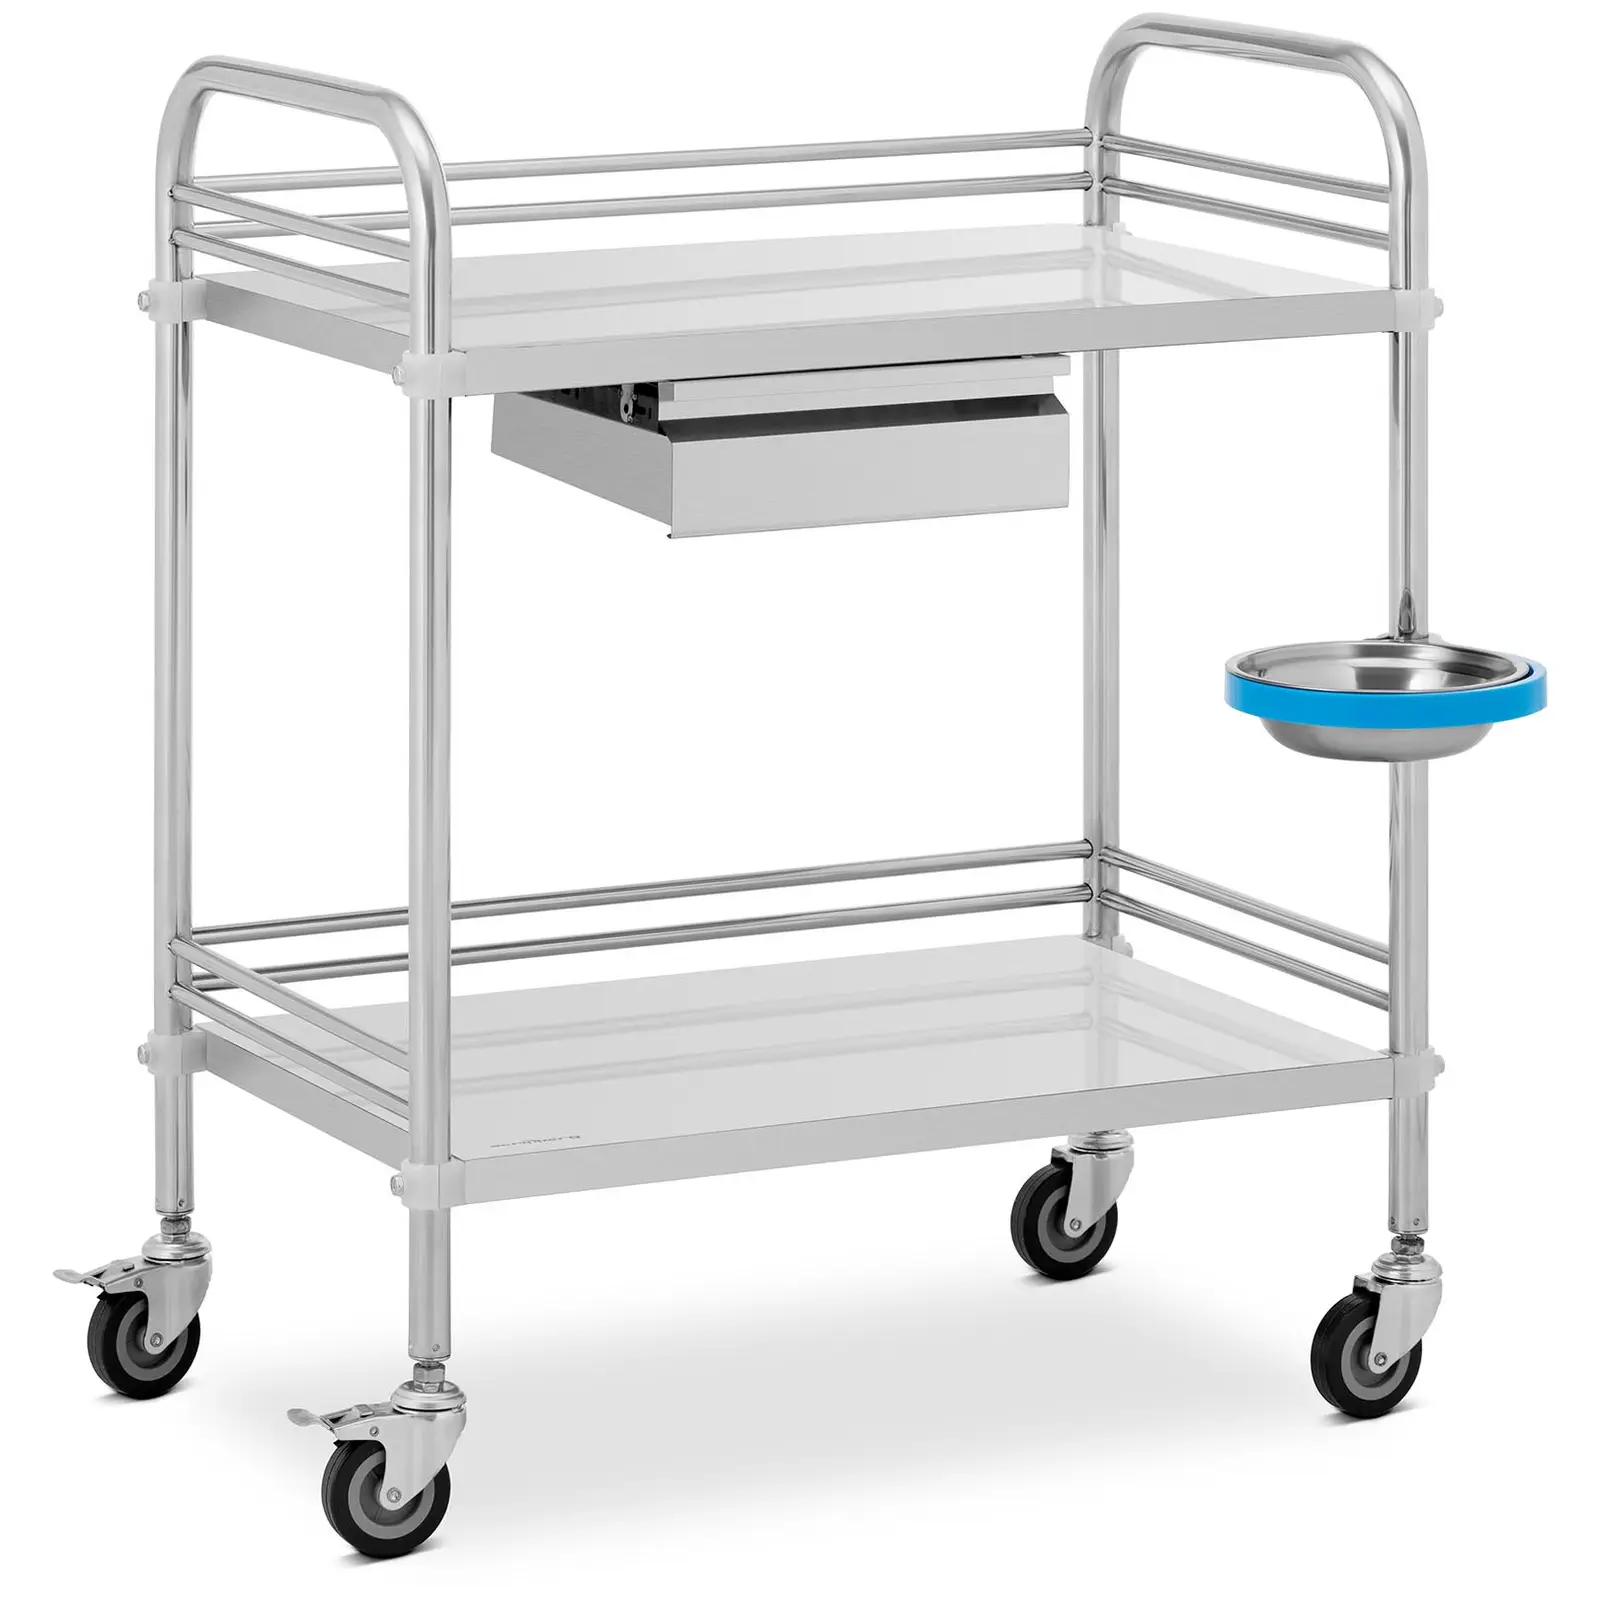 Laboratory Trolley - stainless steel - 2 shelves each 63 x 40 x 12.5 cm - 1 drawer - 20 kg